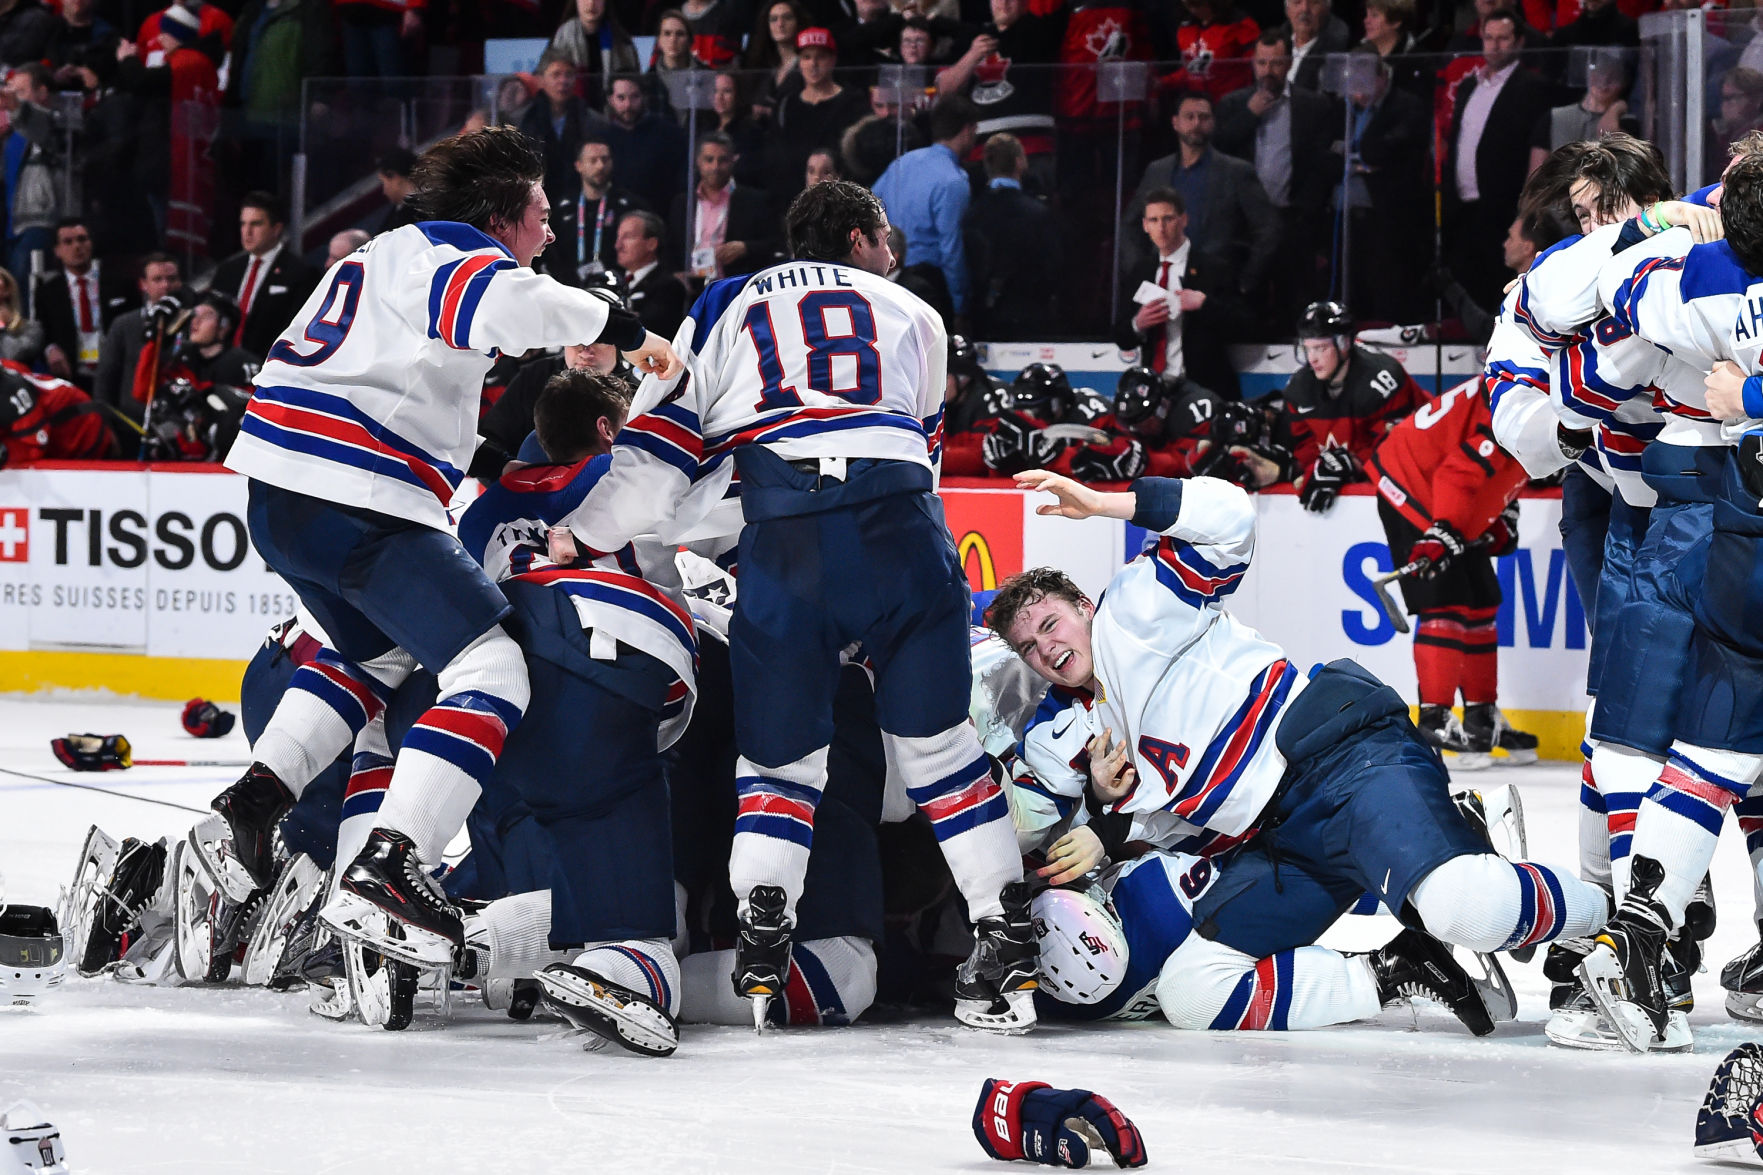 NHL Network to broadcast all USA World Junior games